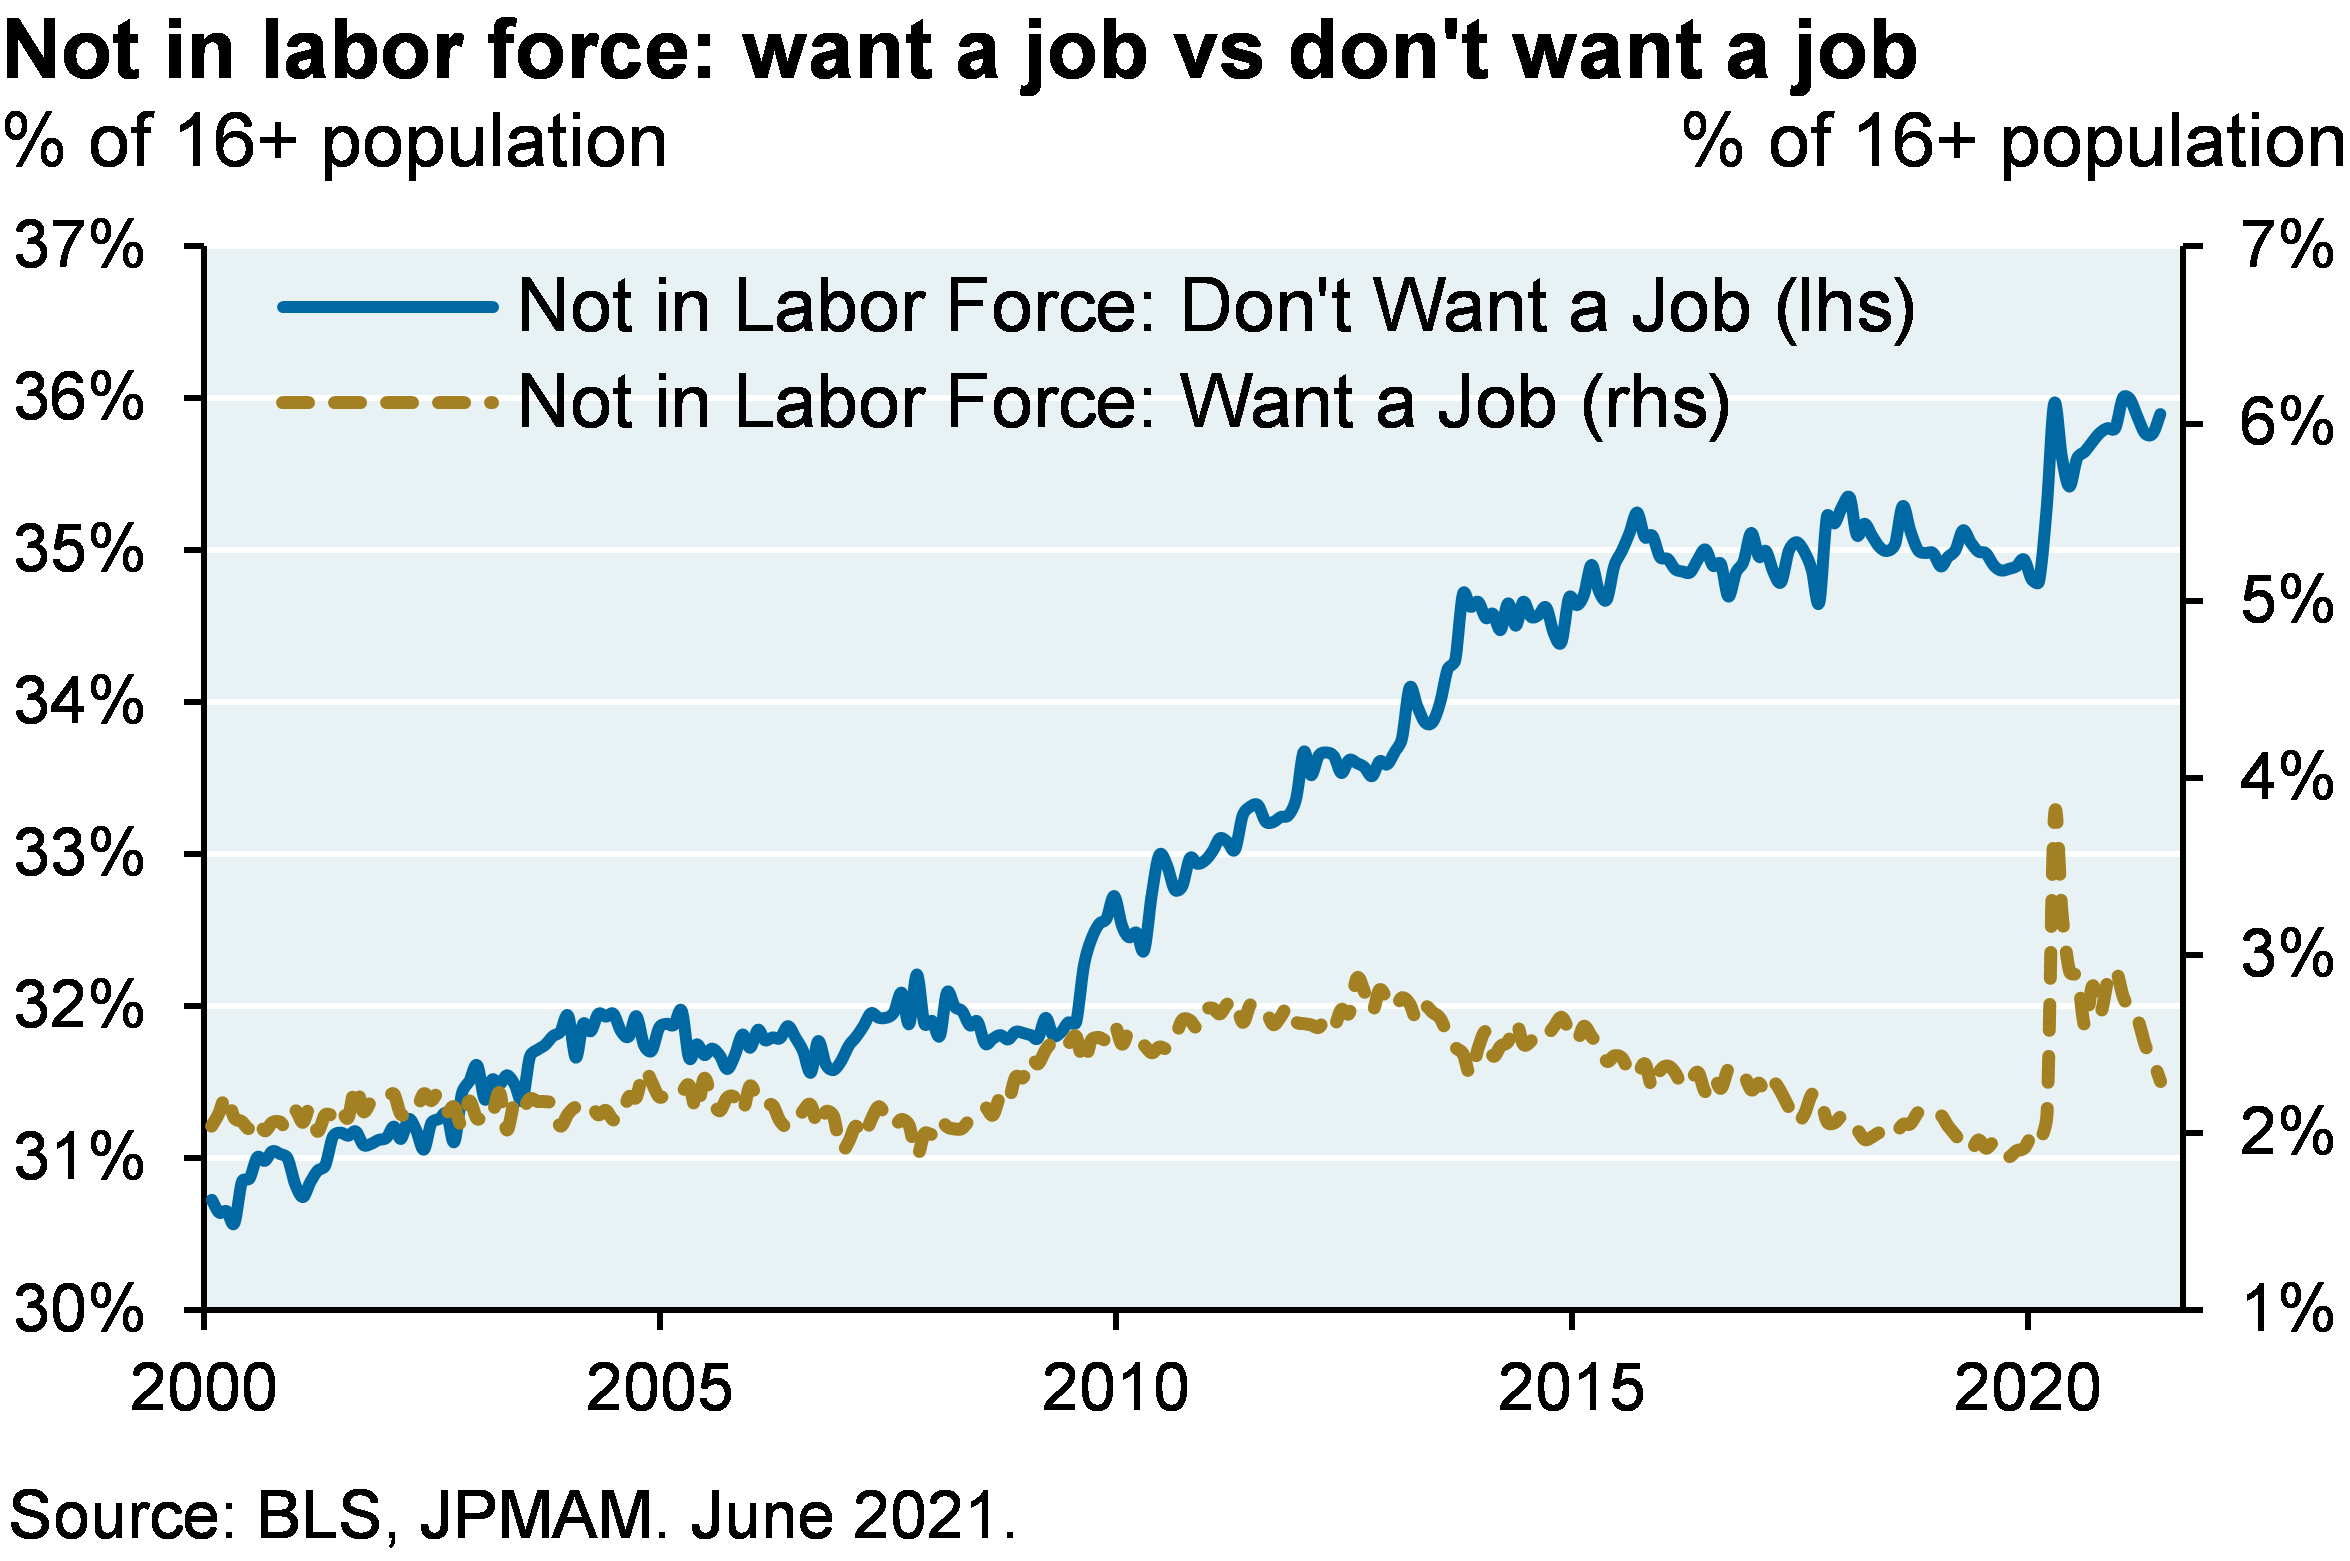 Not in labor force: want a job vs don't want a job